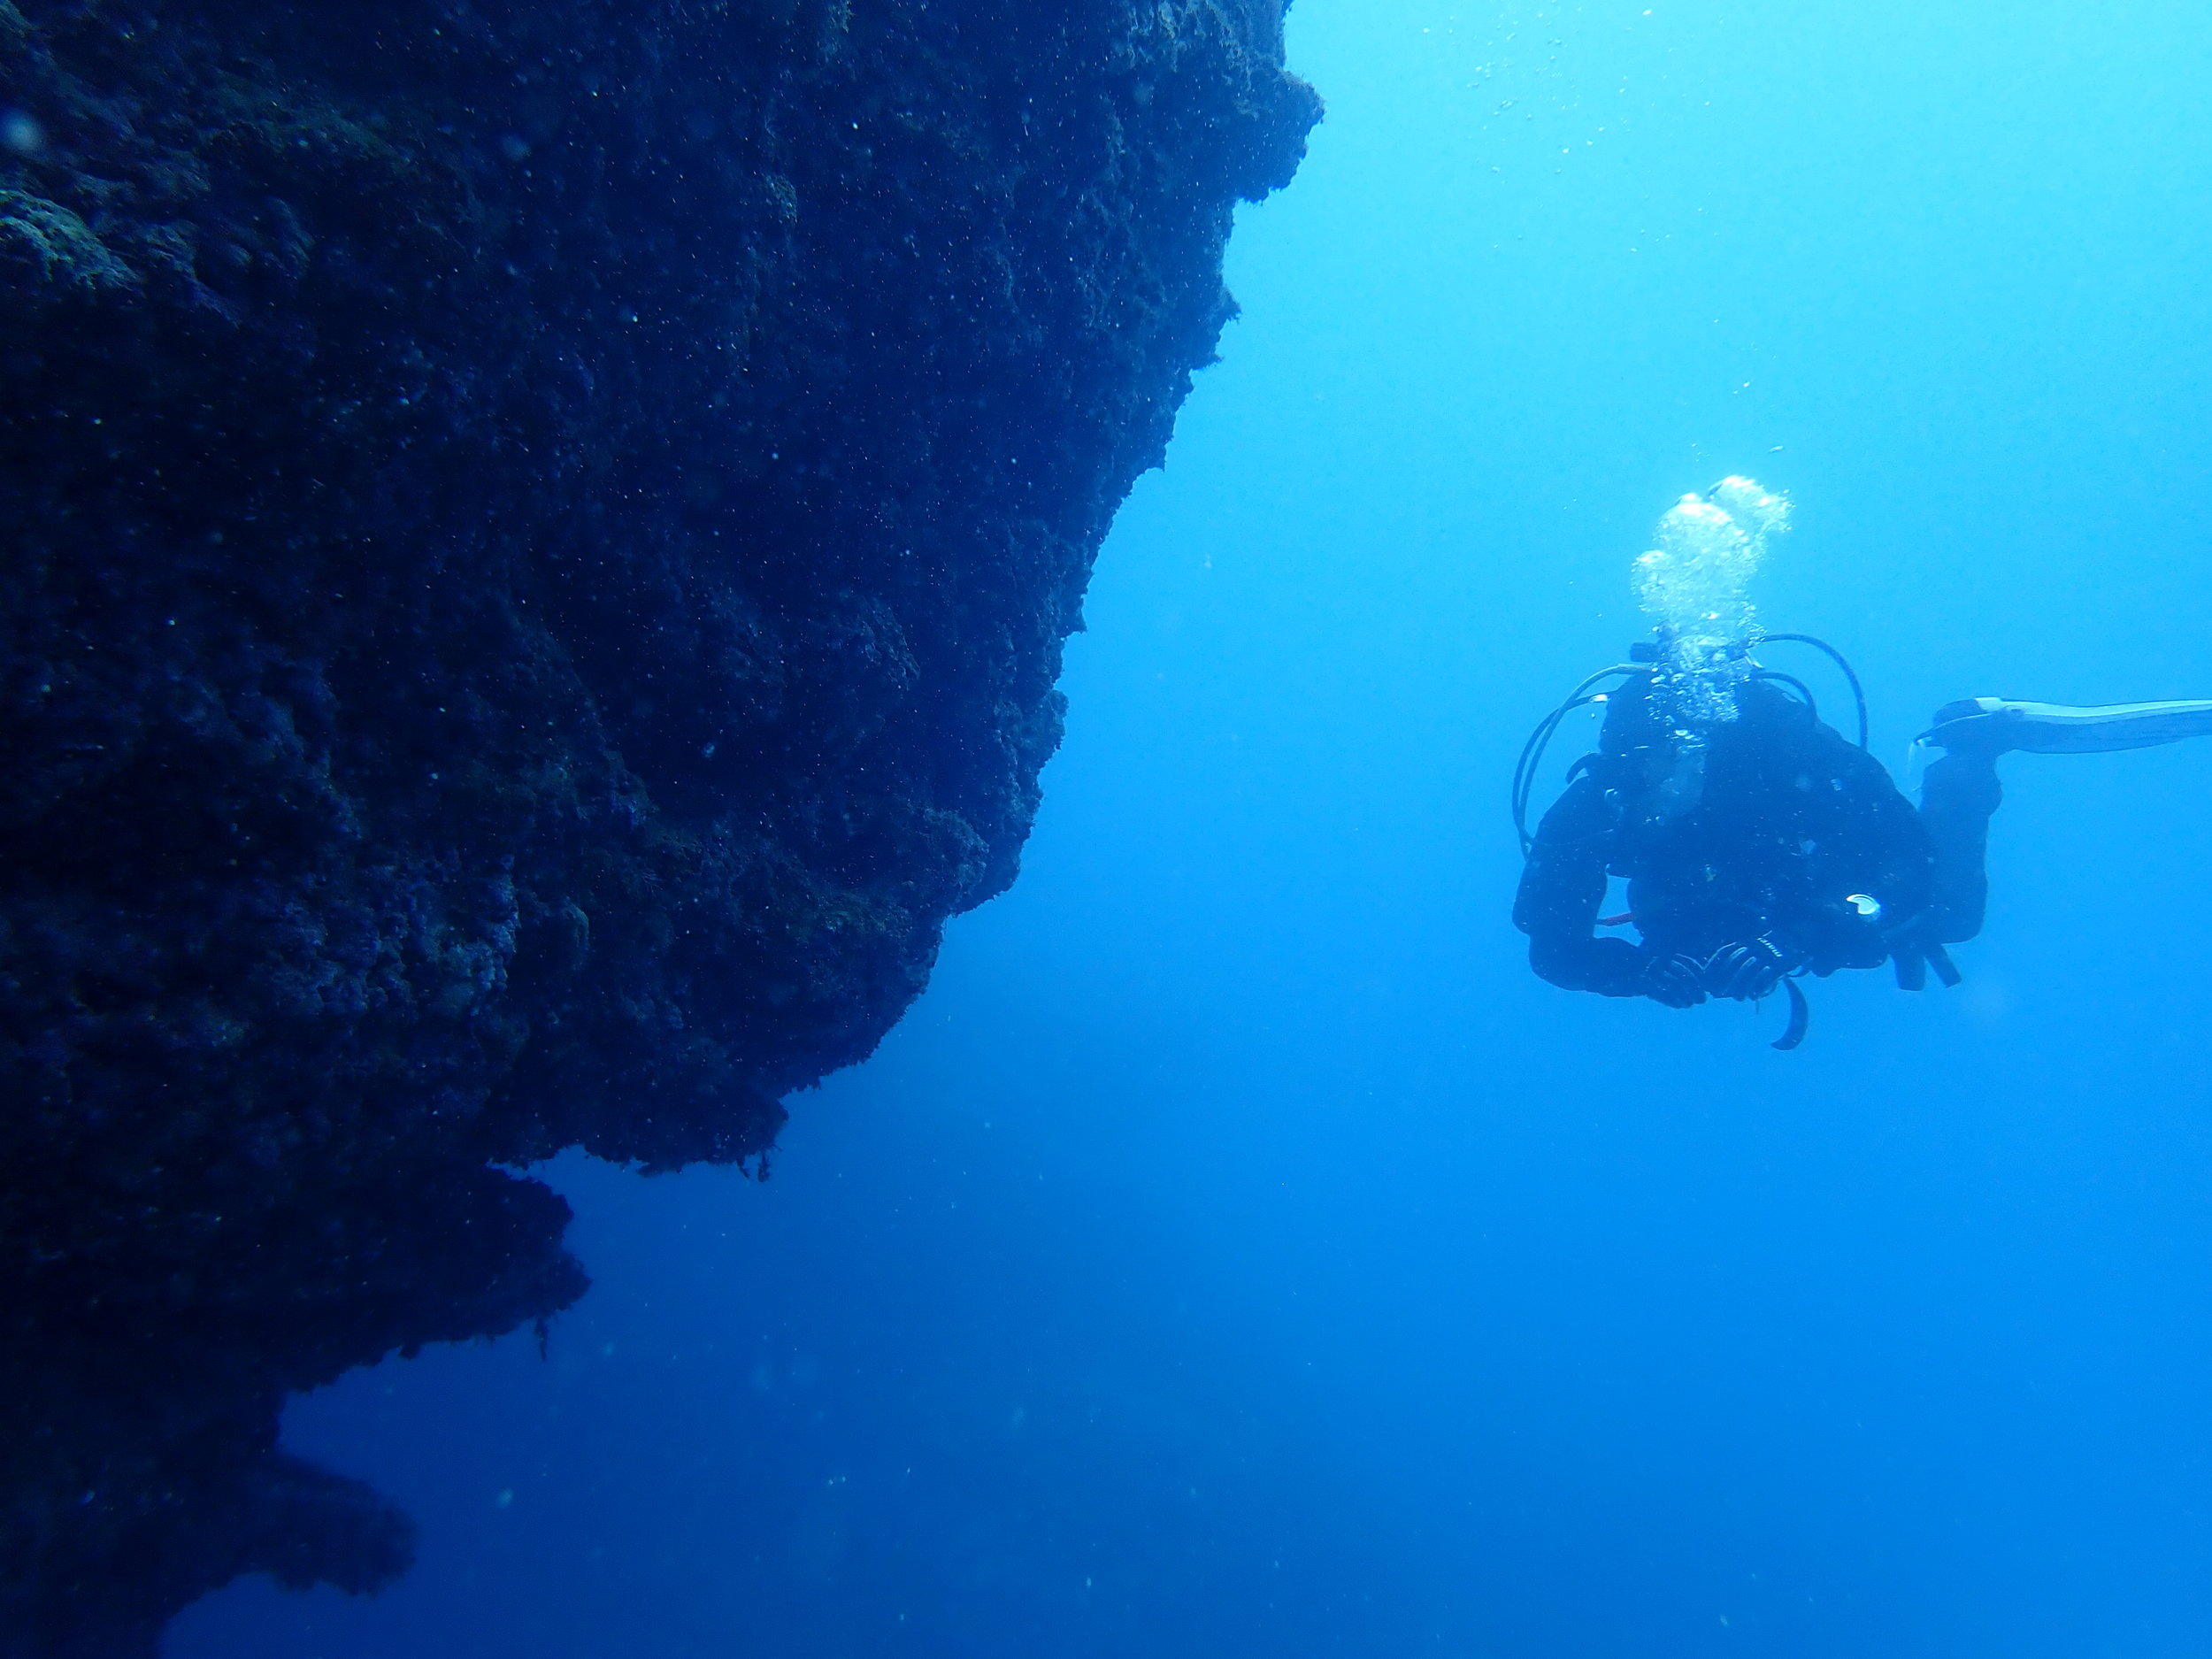  The ~60 foot wall of the Haleiwa Trench is great for refining our drysuit buoyancy skills. 